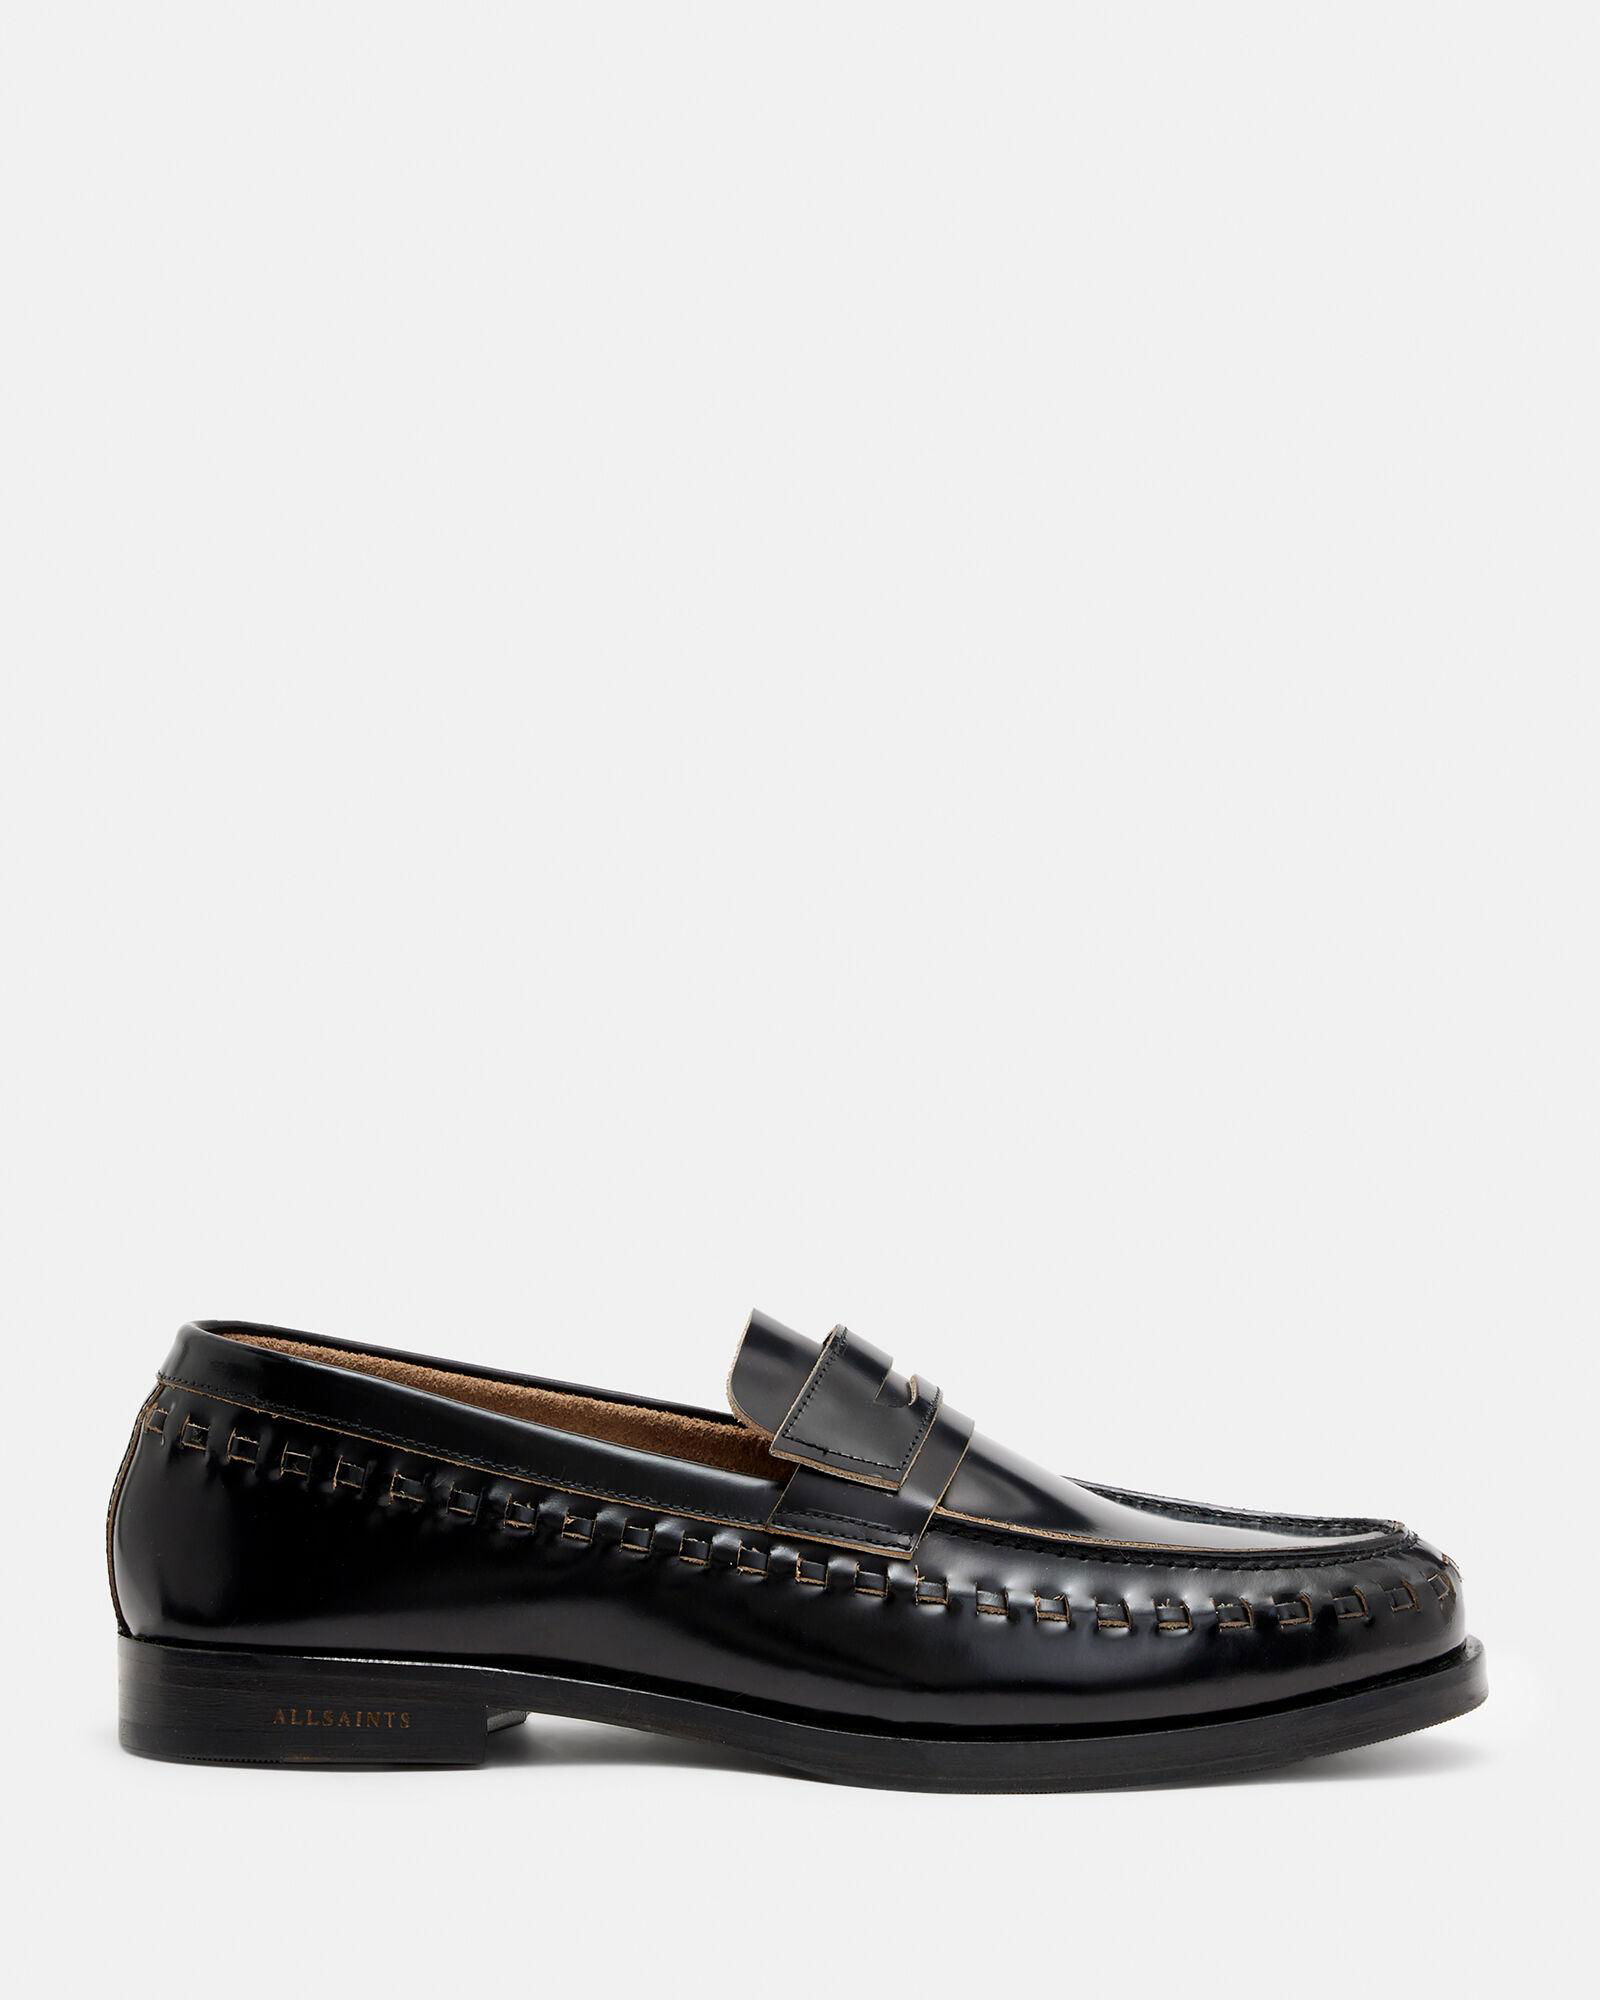 Sammy High Shine Leather Loafers by ALLSAINTS